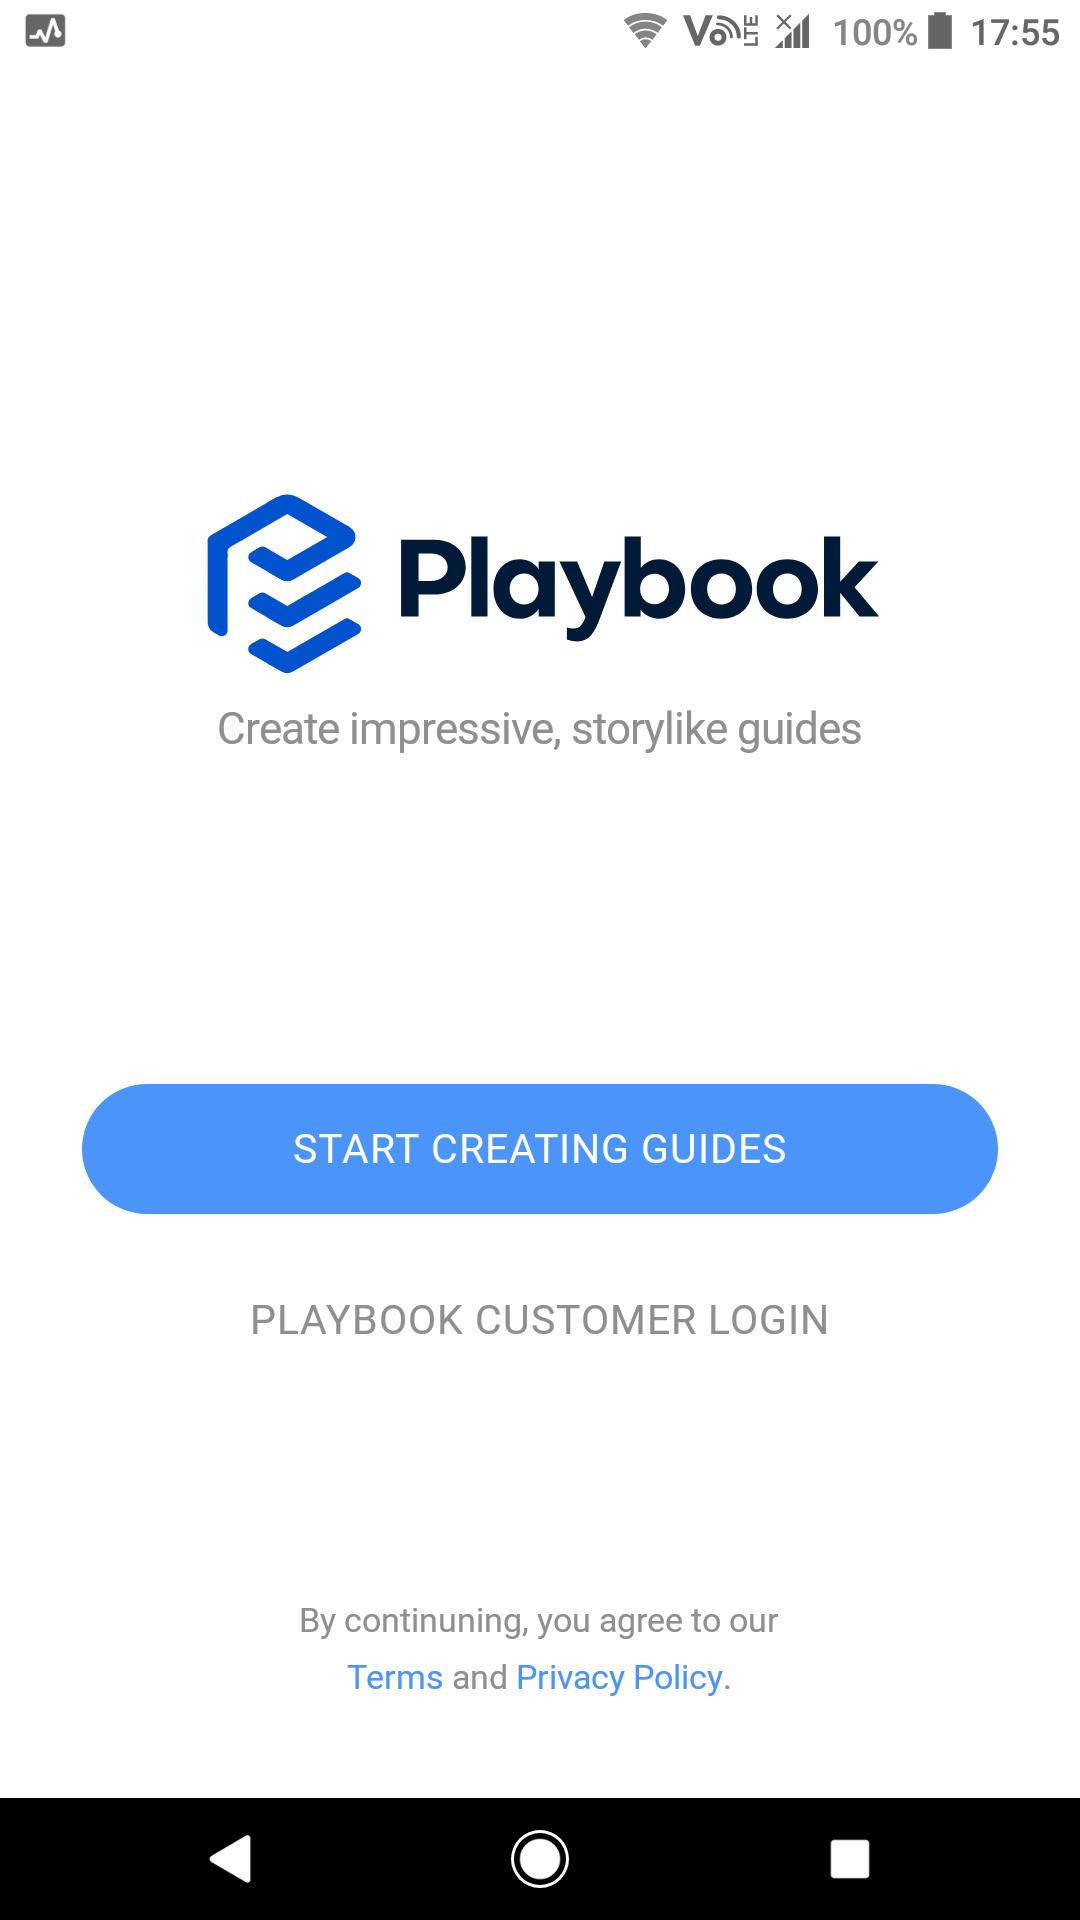 YÊU CẦU HOẶC SHARE ANDROID APPS - PLAYBOOK APPS CHO PLAYBOOK 2.0, PDF, Mobile App